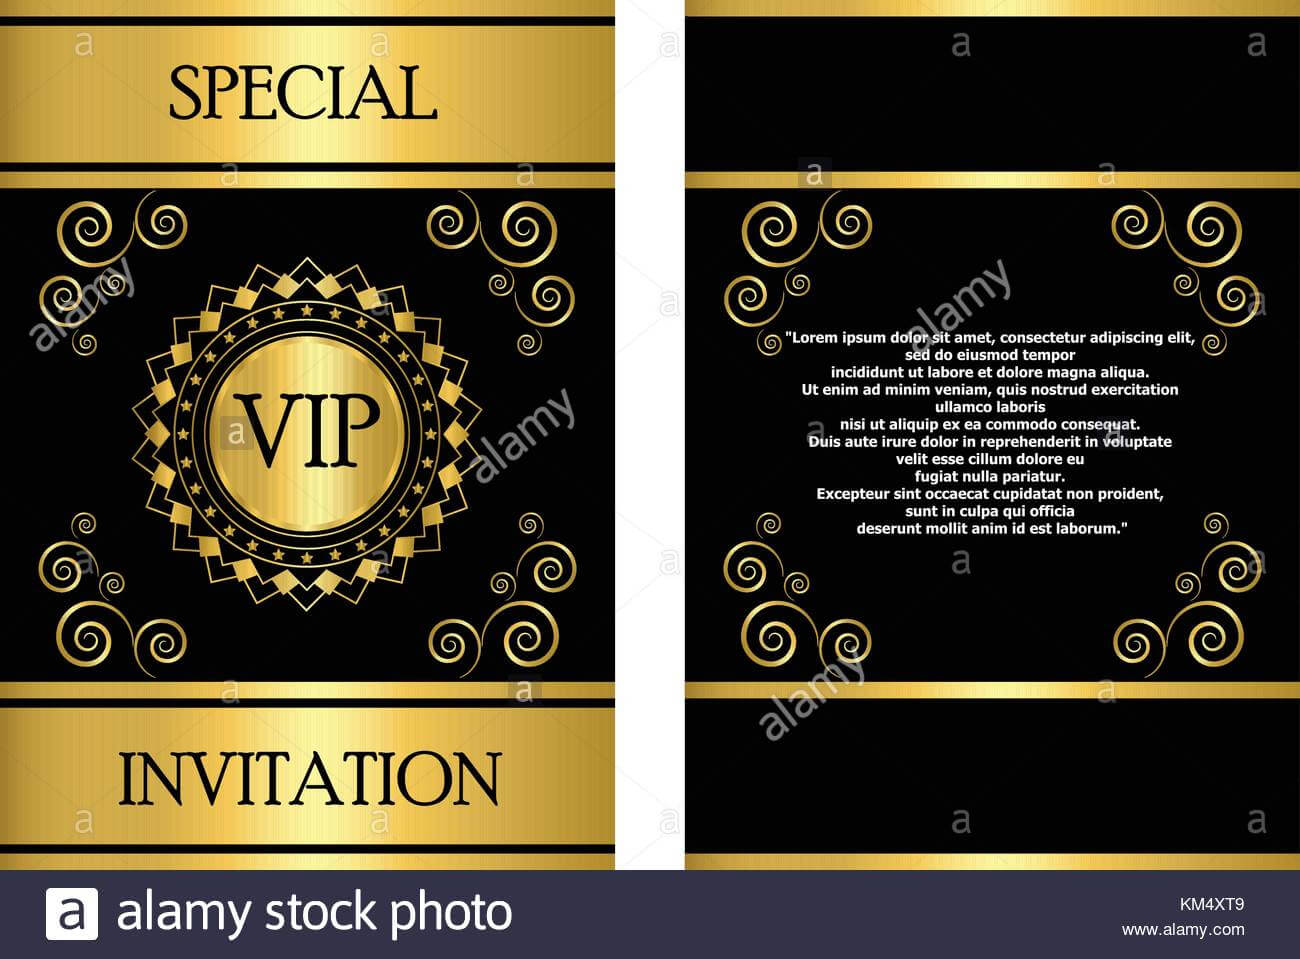 A Golden Vip Invitation Card Template That Can Be Used For Within Event Invitation Card Template